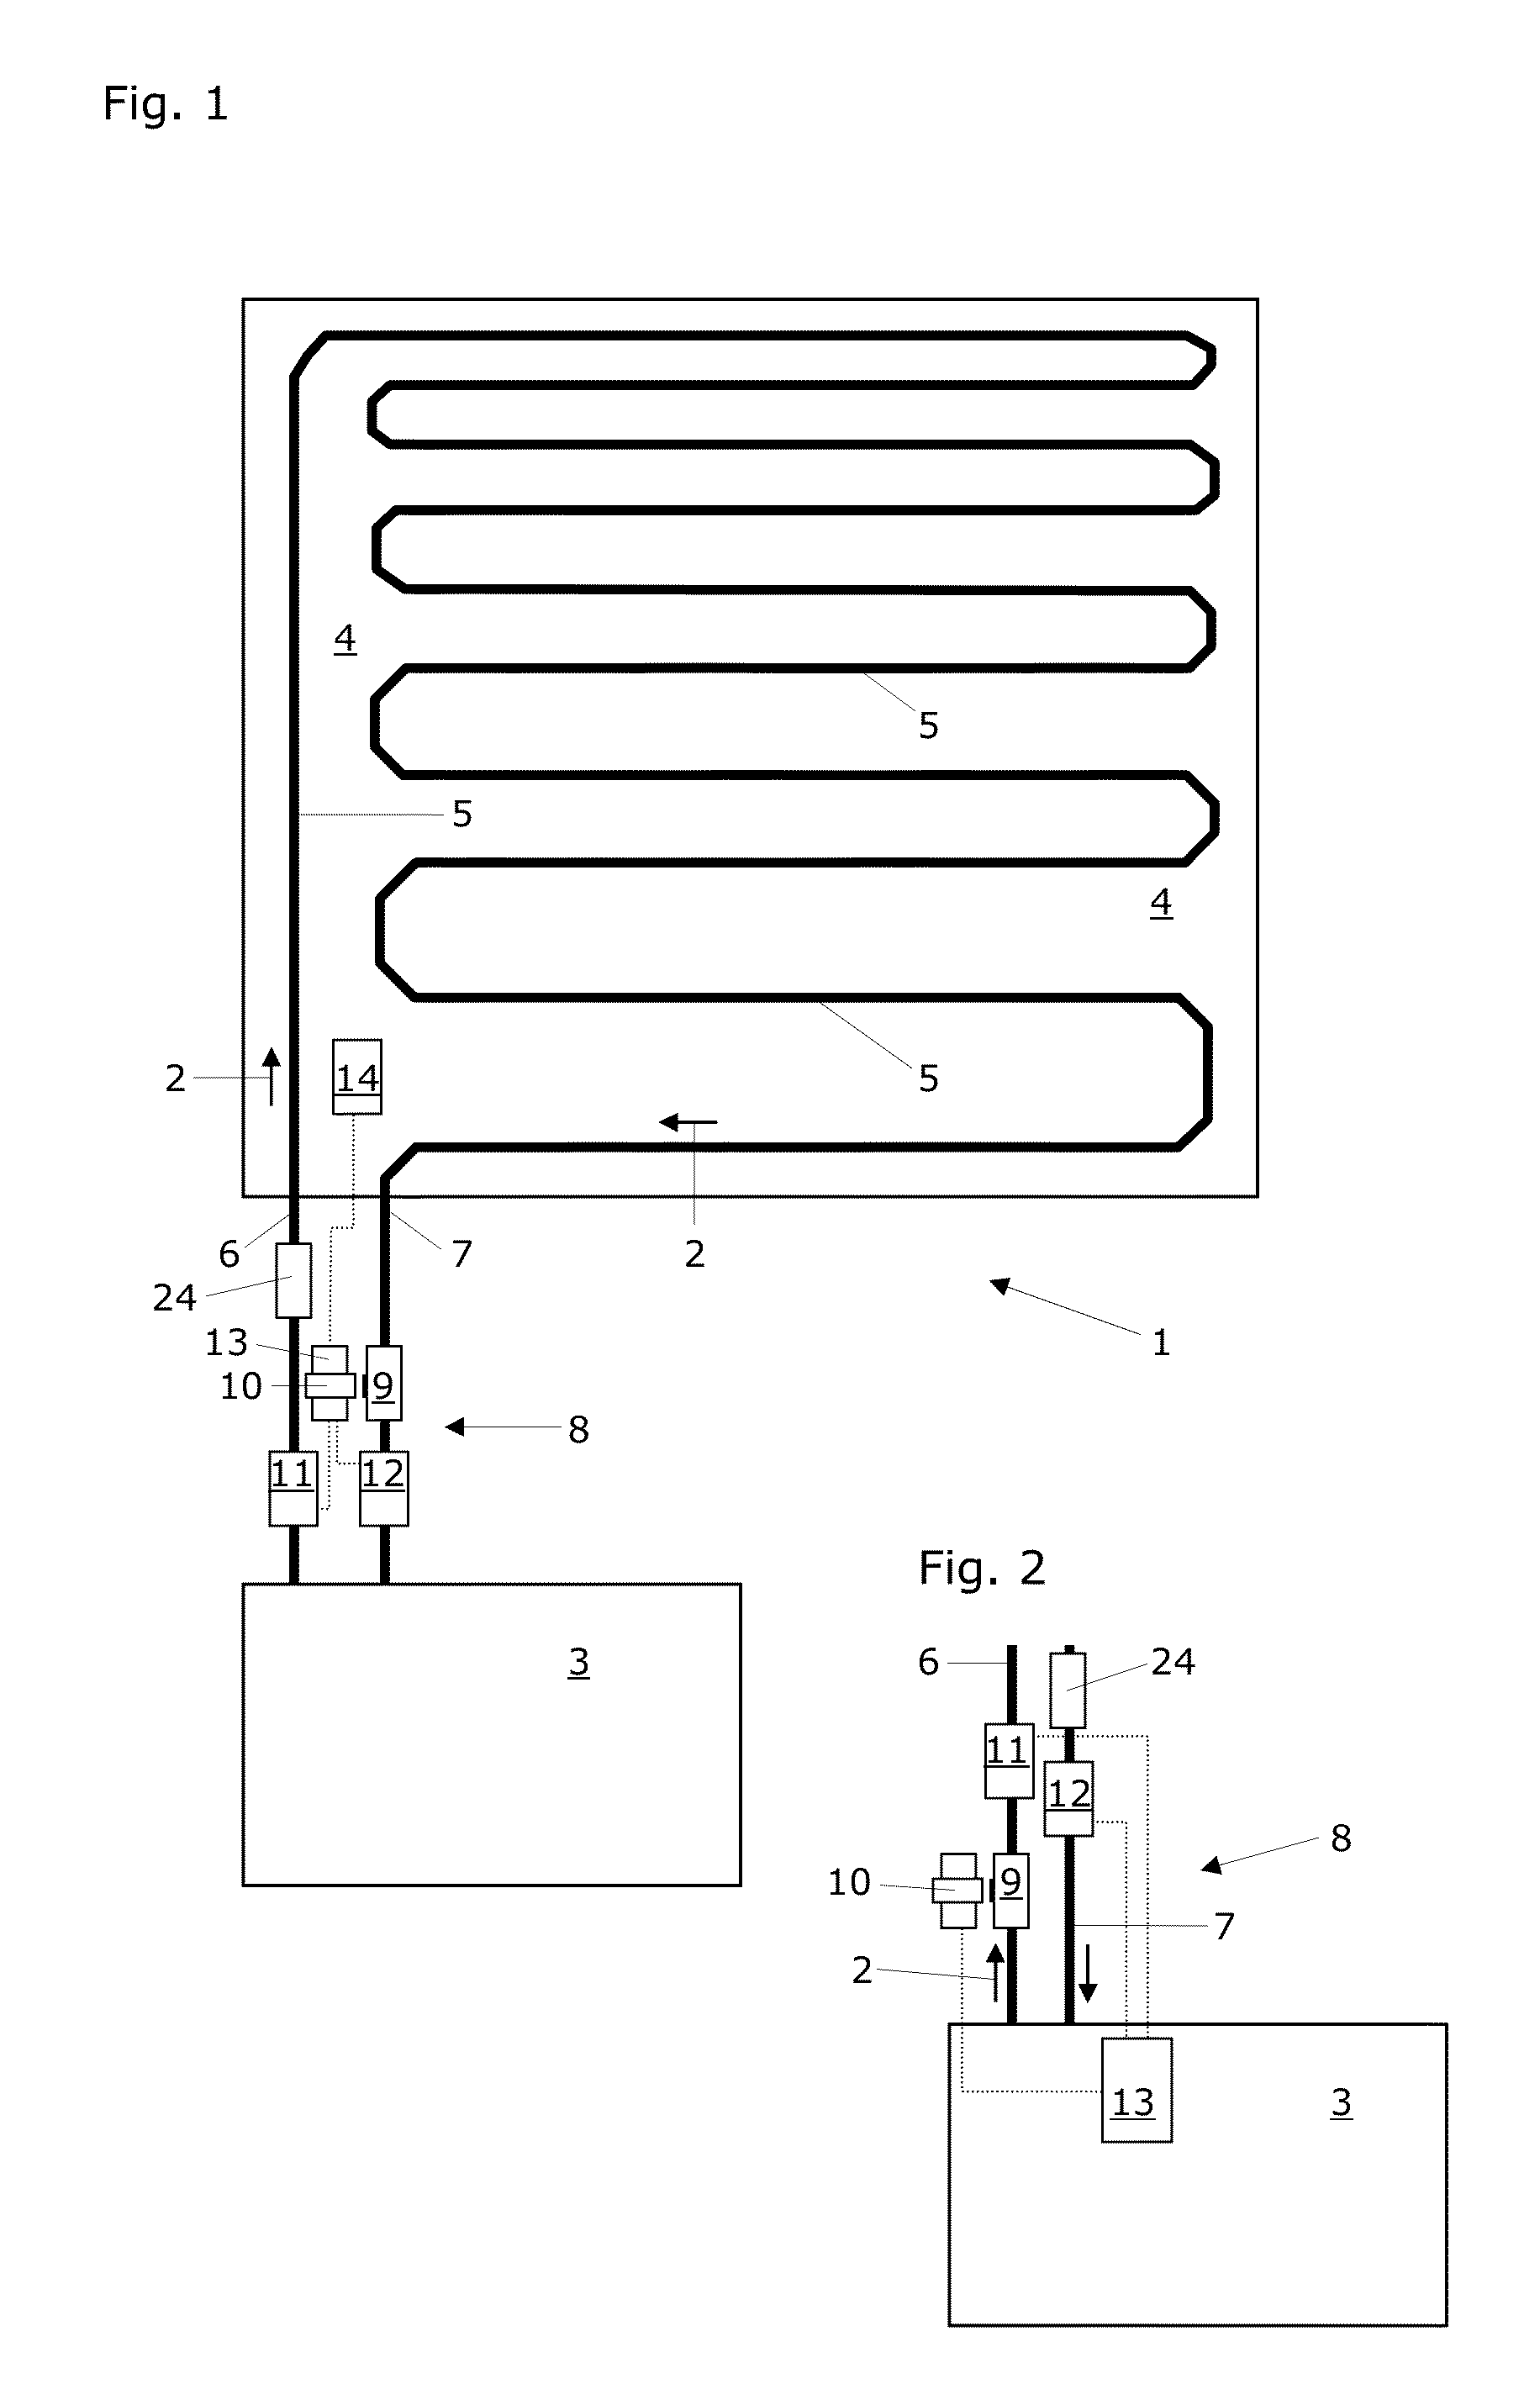 Method and system for controlling the temperature of components